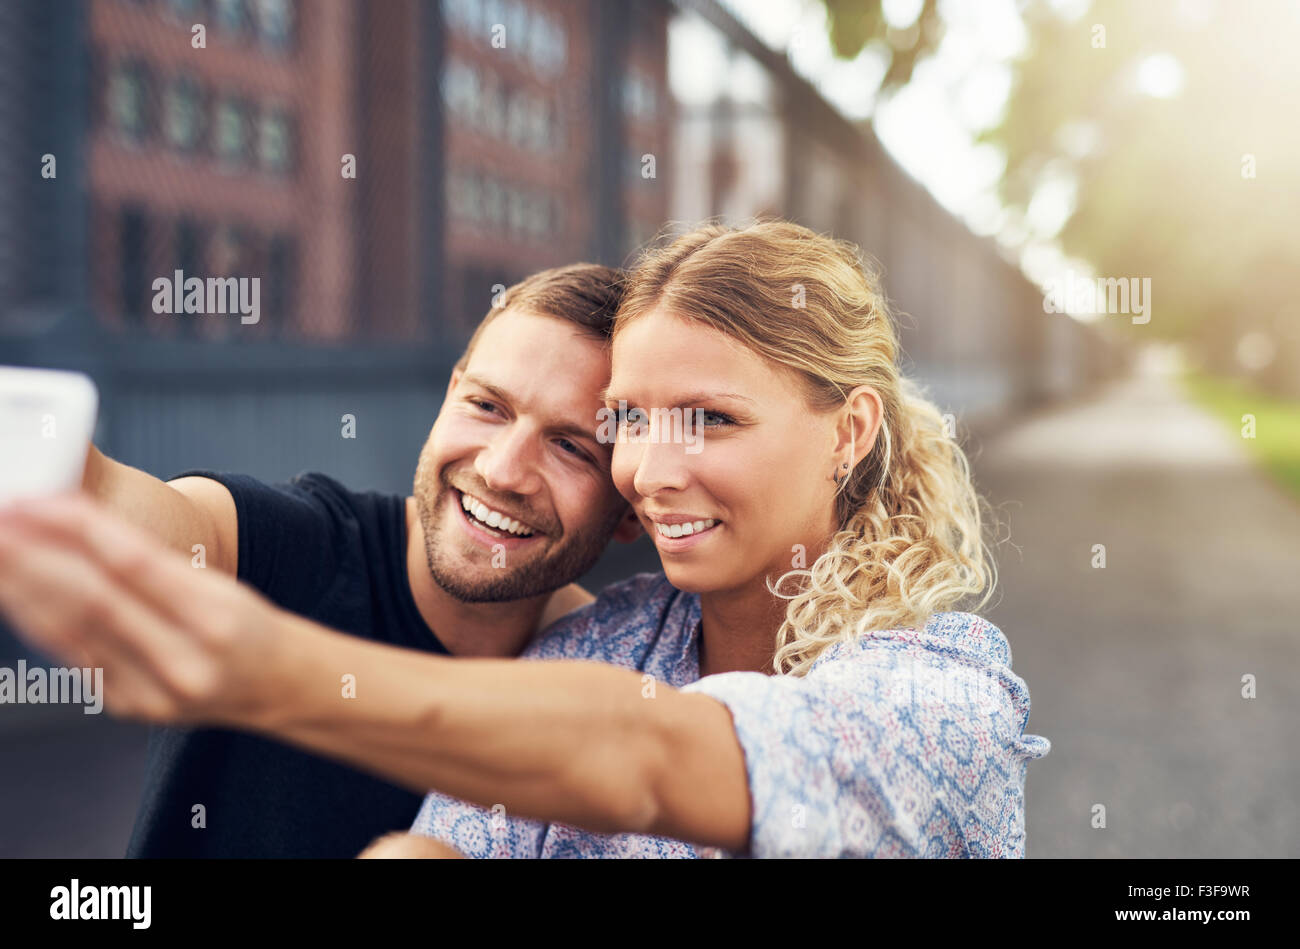 Beautiful Couple Taking a Selfie While Sitting in a Park Stock Photo